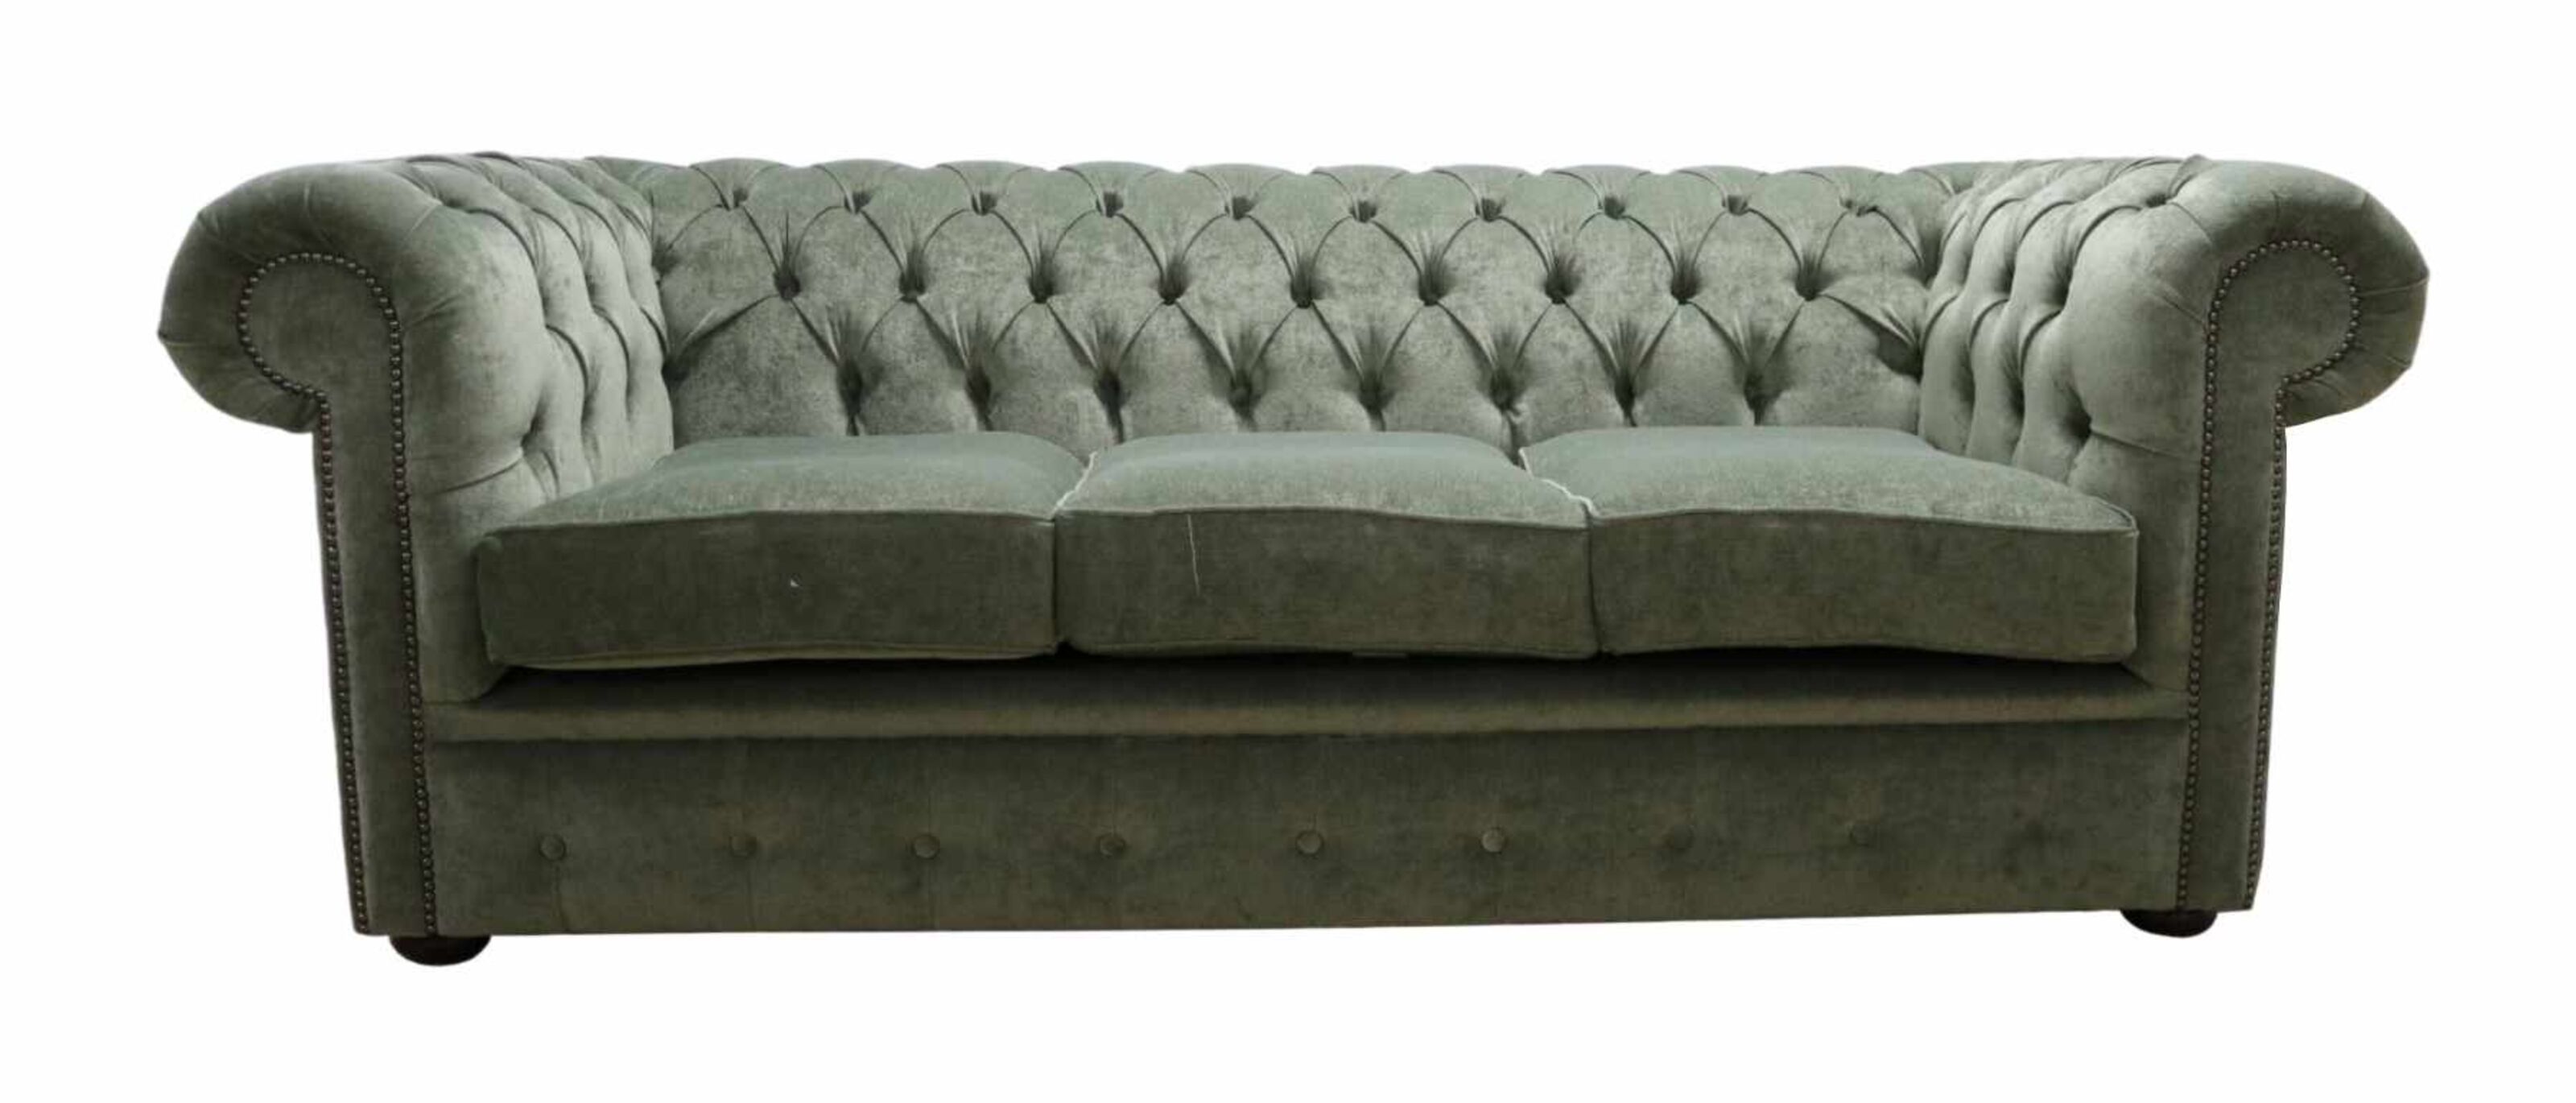 Dubai's Distinguished Décor Chesterfield Sofas in the Spotlight  %Post Title